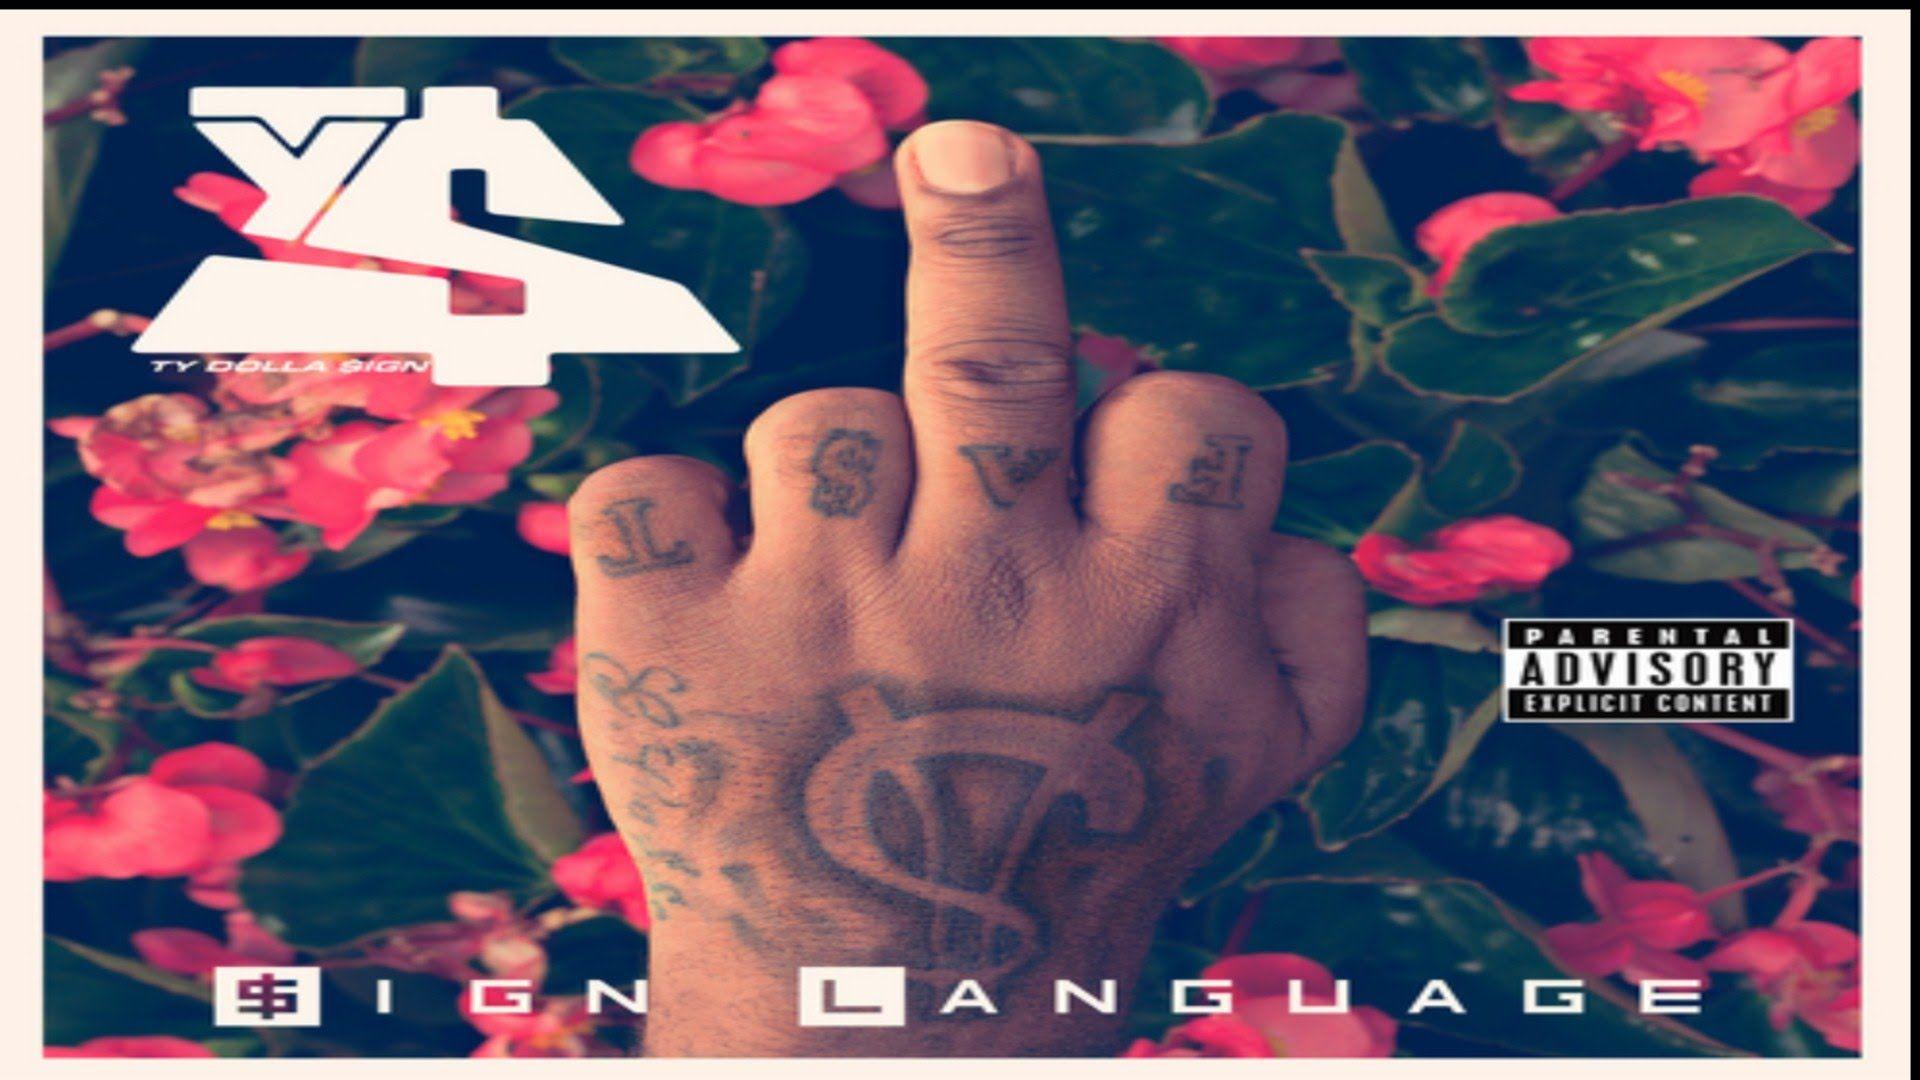 Ty Dolla $ign- Sign Language Review